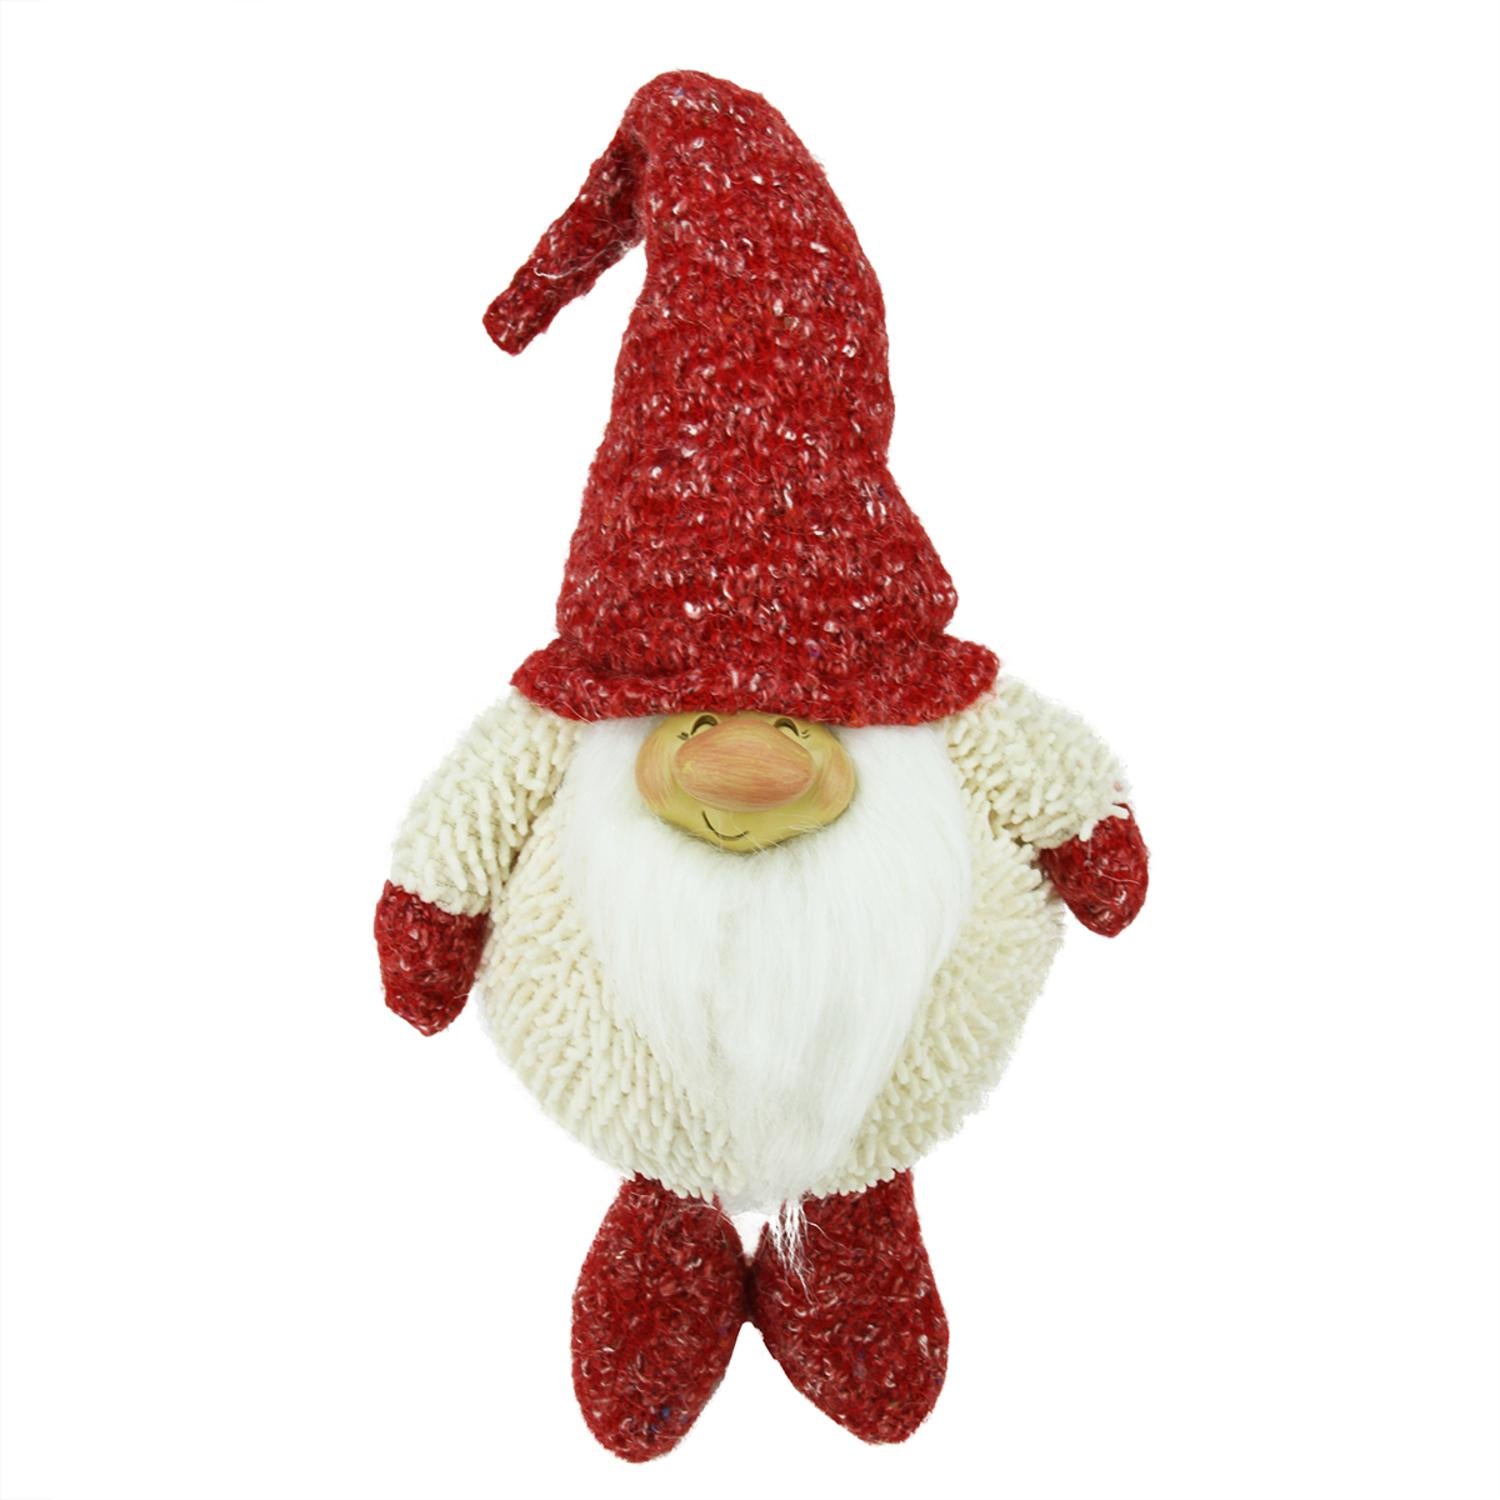 15" Textured Ivory And Red Chubby Smiling Gnome Plush Table Top Christmas Figure